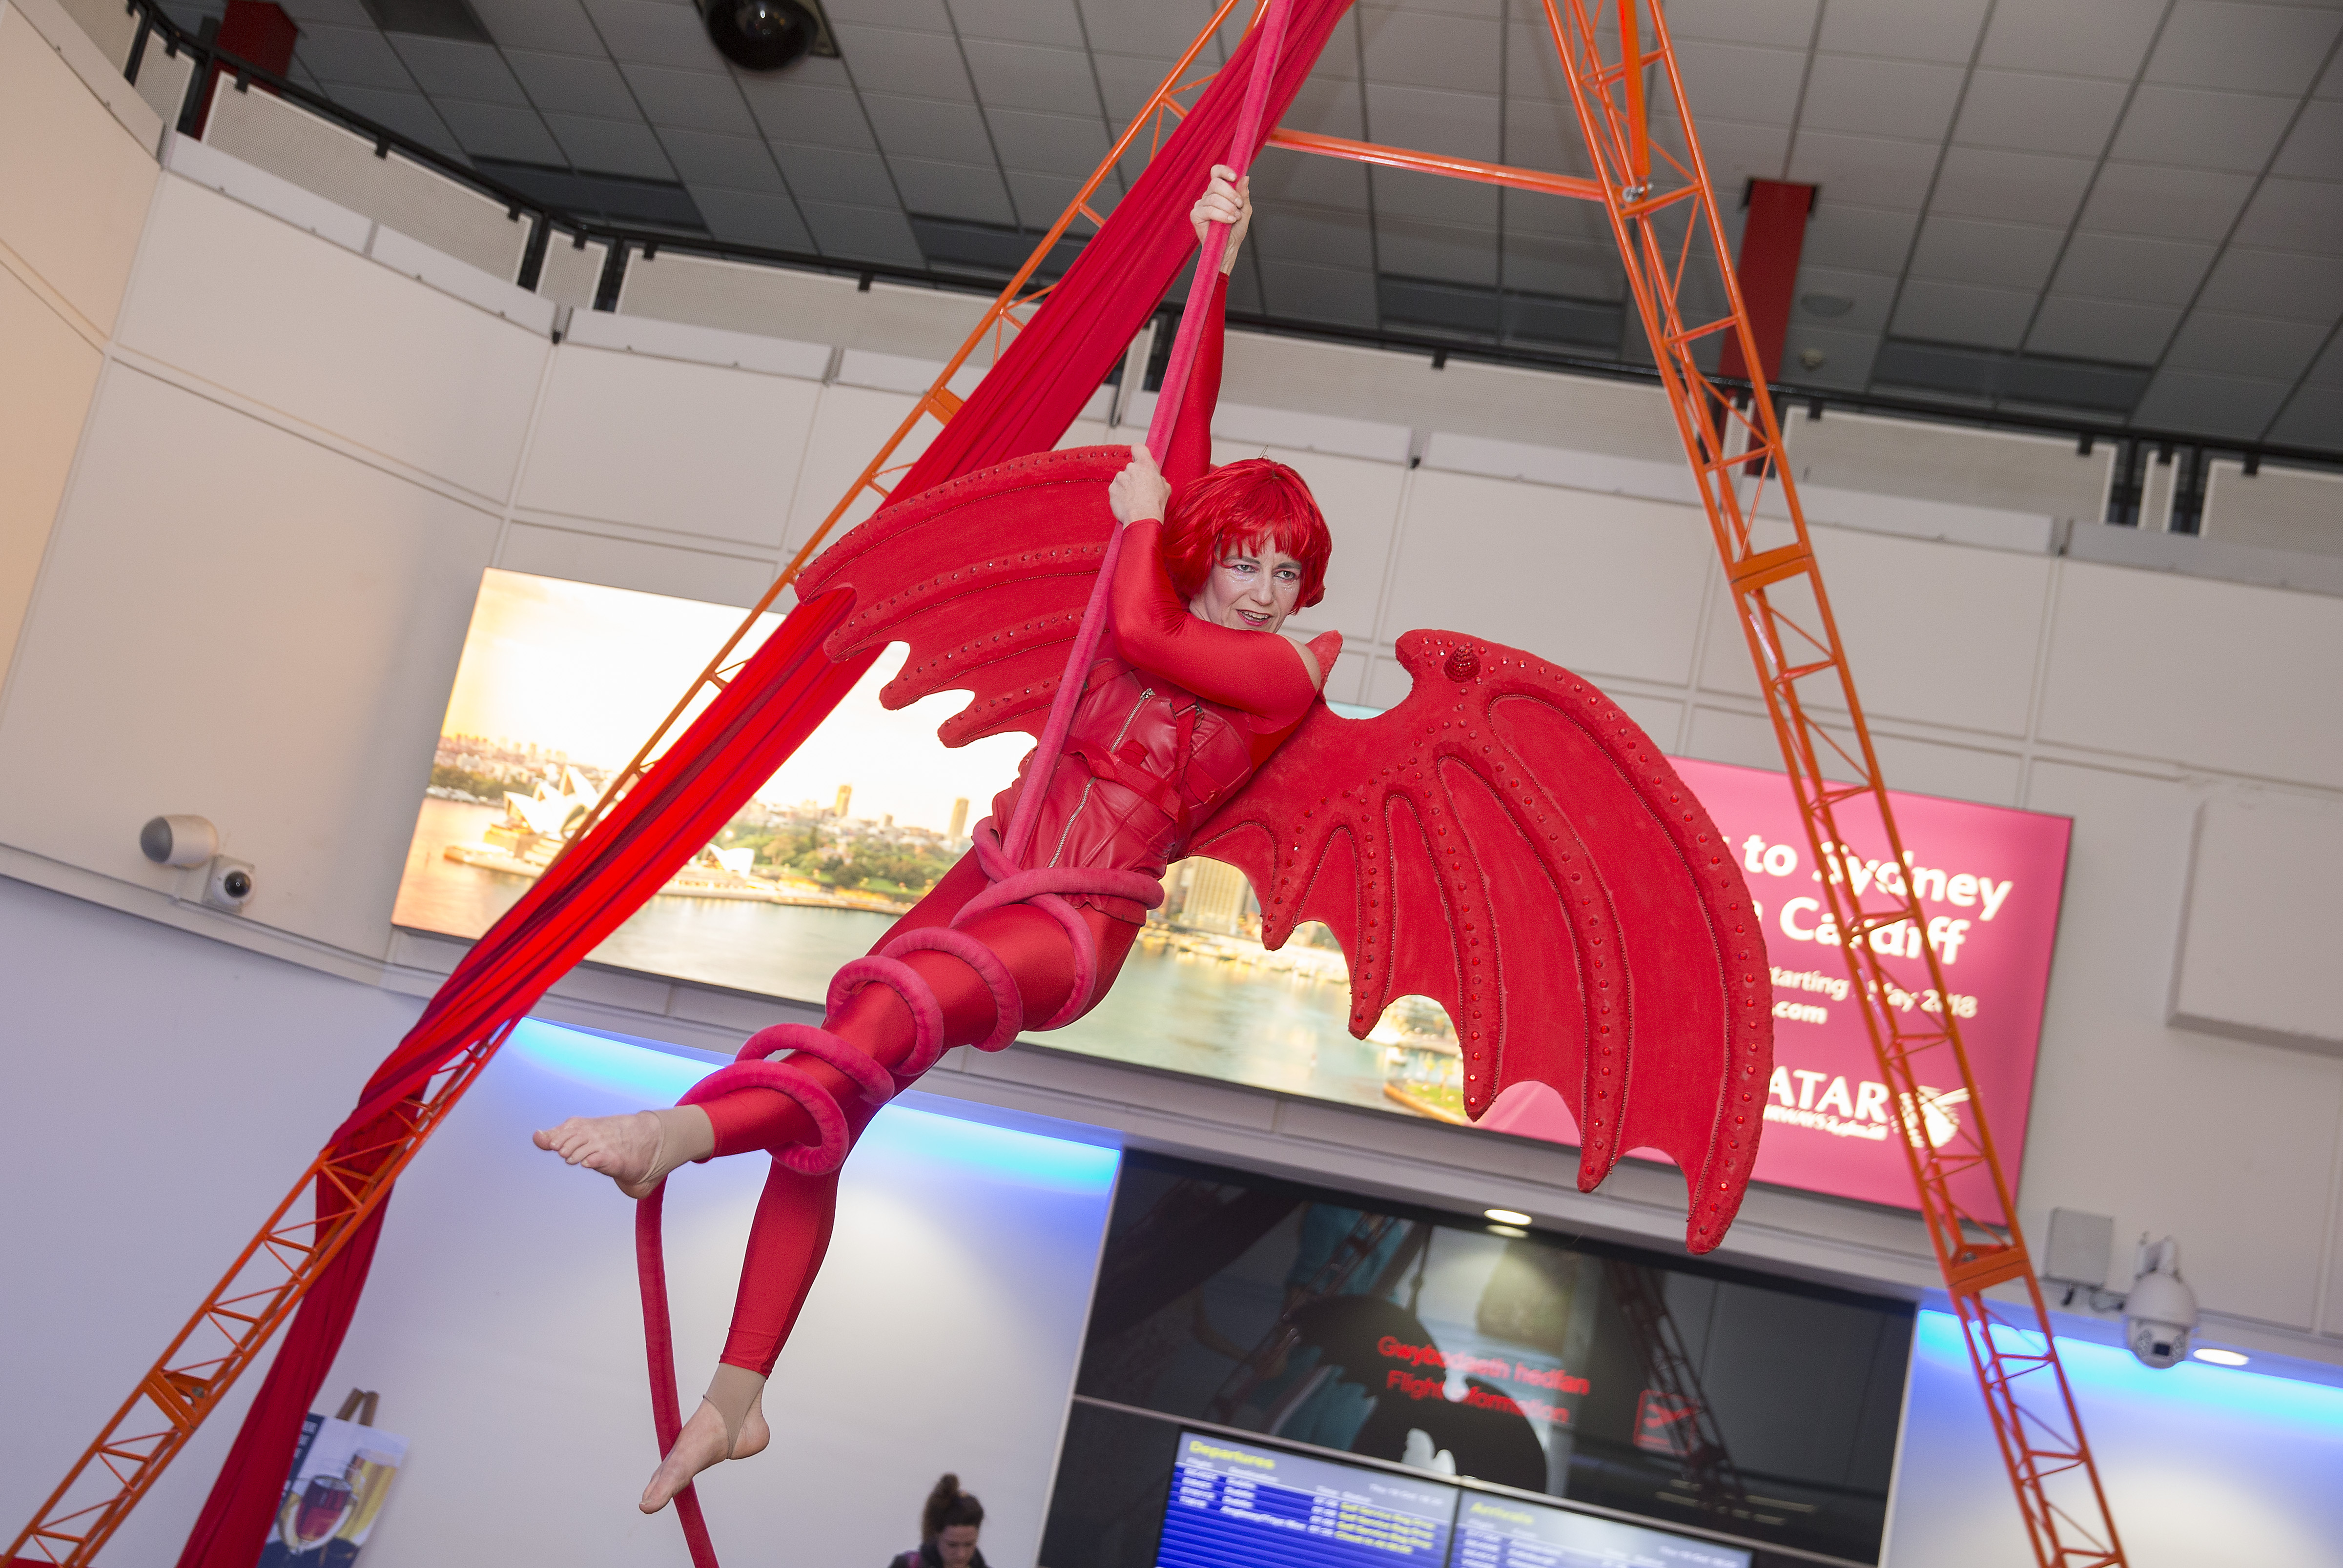 An Organised Kaos circus performer dressed as a red dragon suspended from a rig at Cardiff Airport departures gate